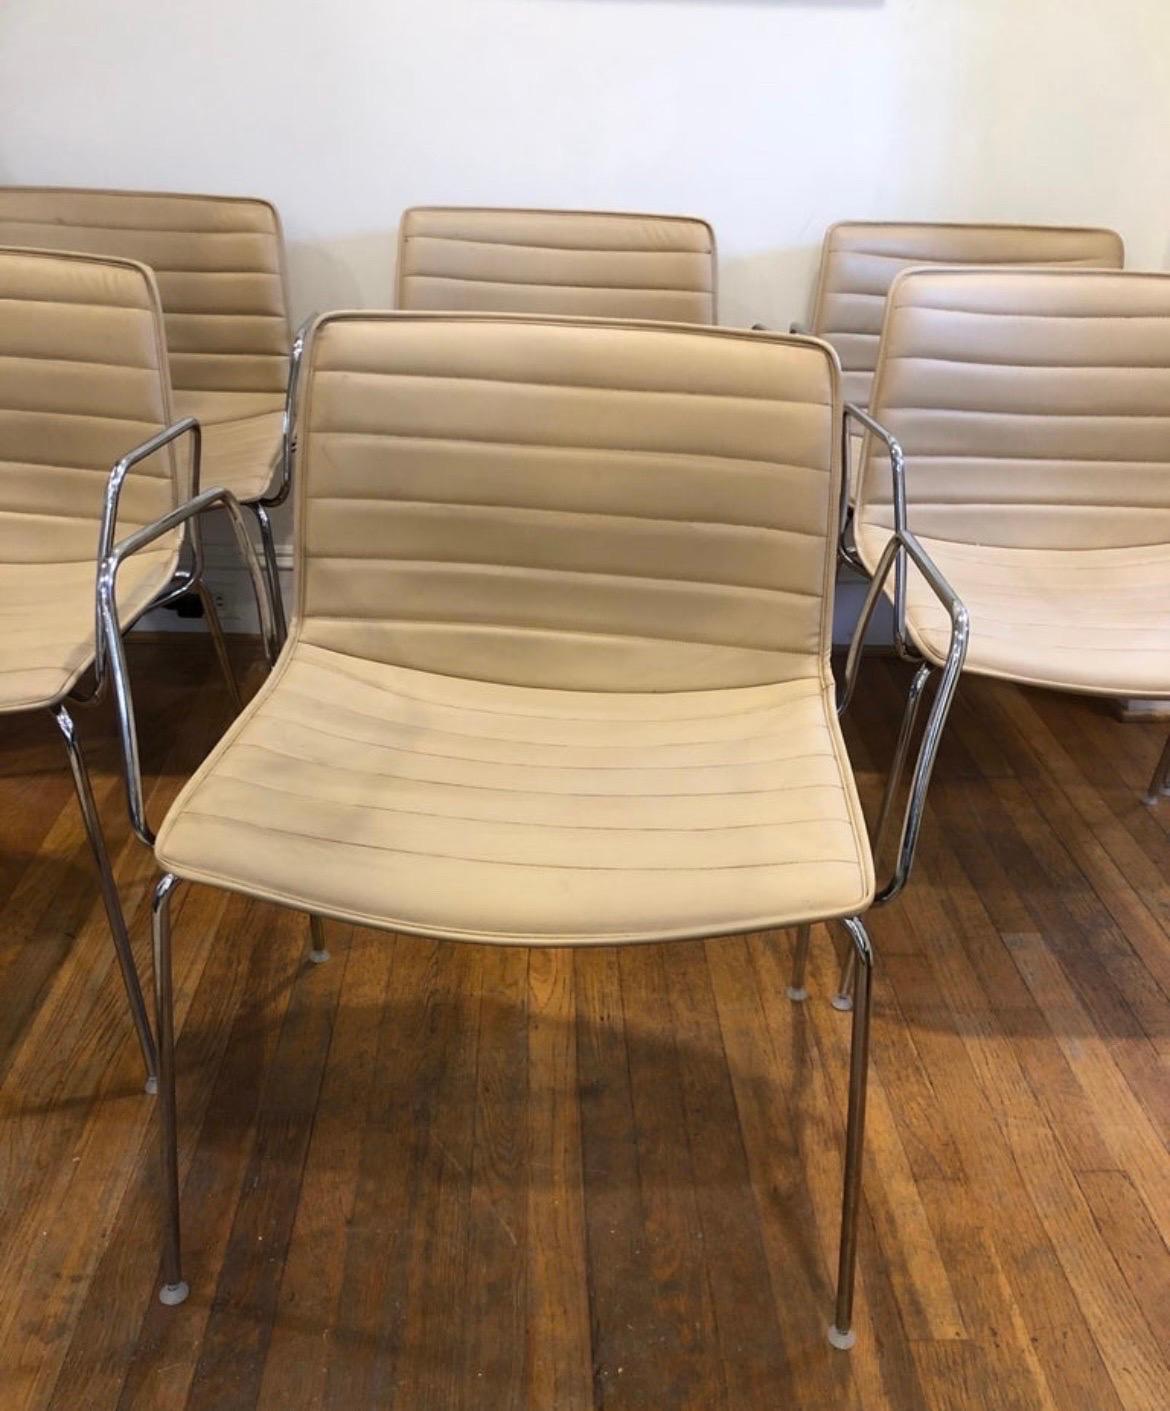 Arper Catifa 53 Chairs - Tan Leather with Steel Base and Arms - 10 Available For Sale 3